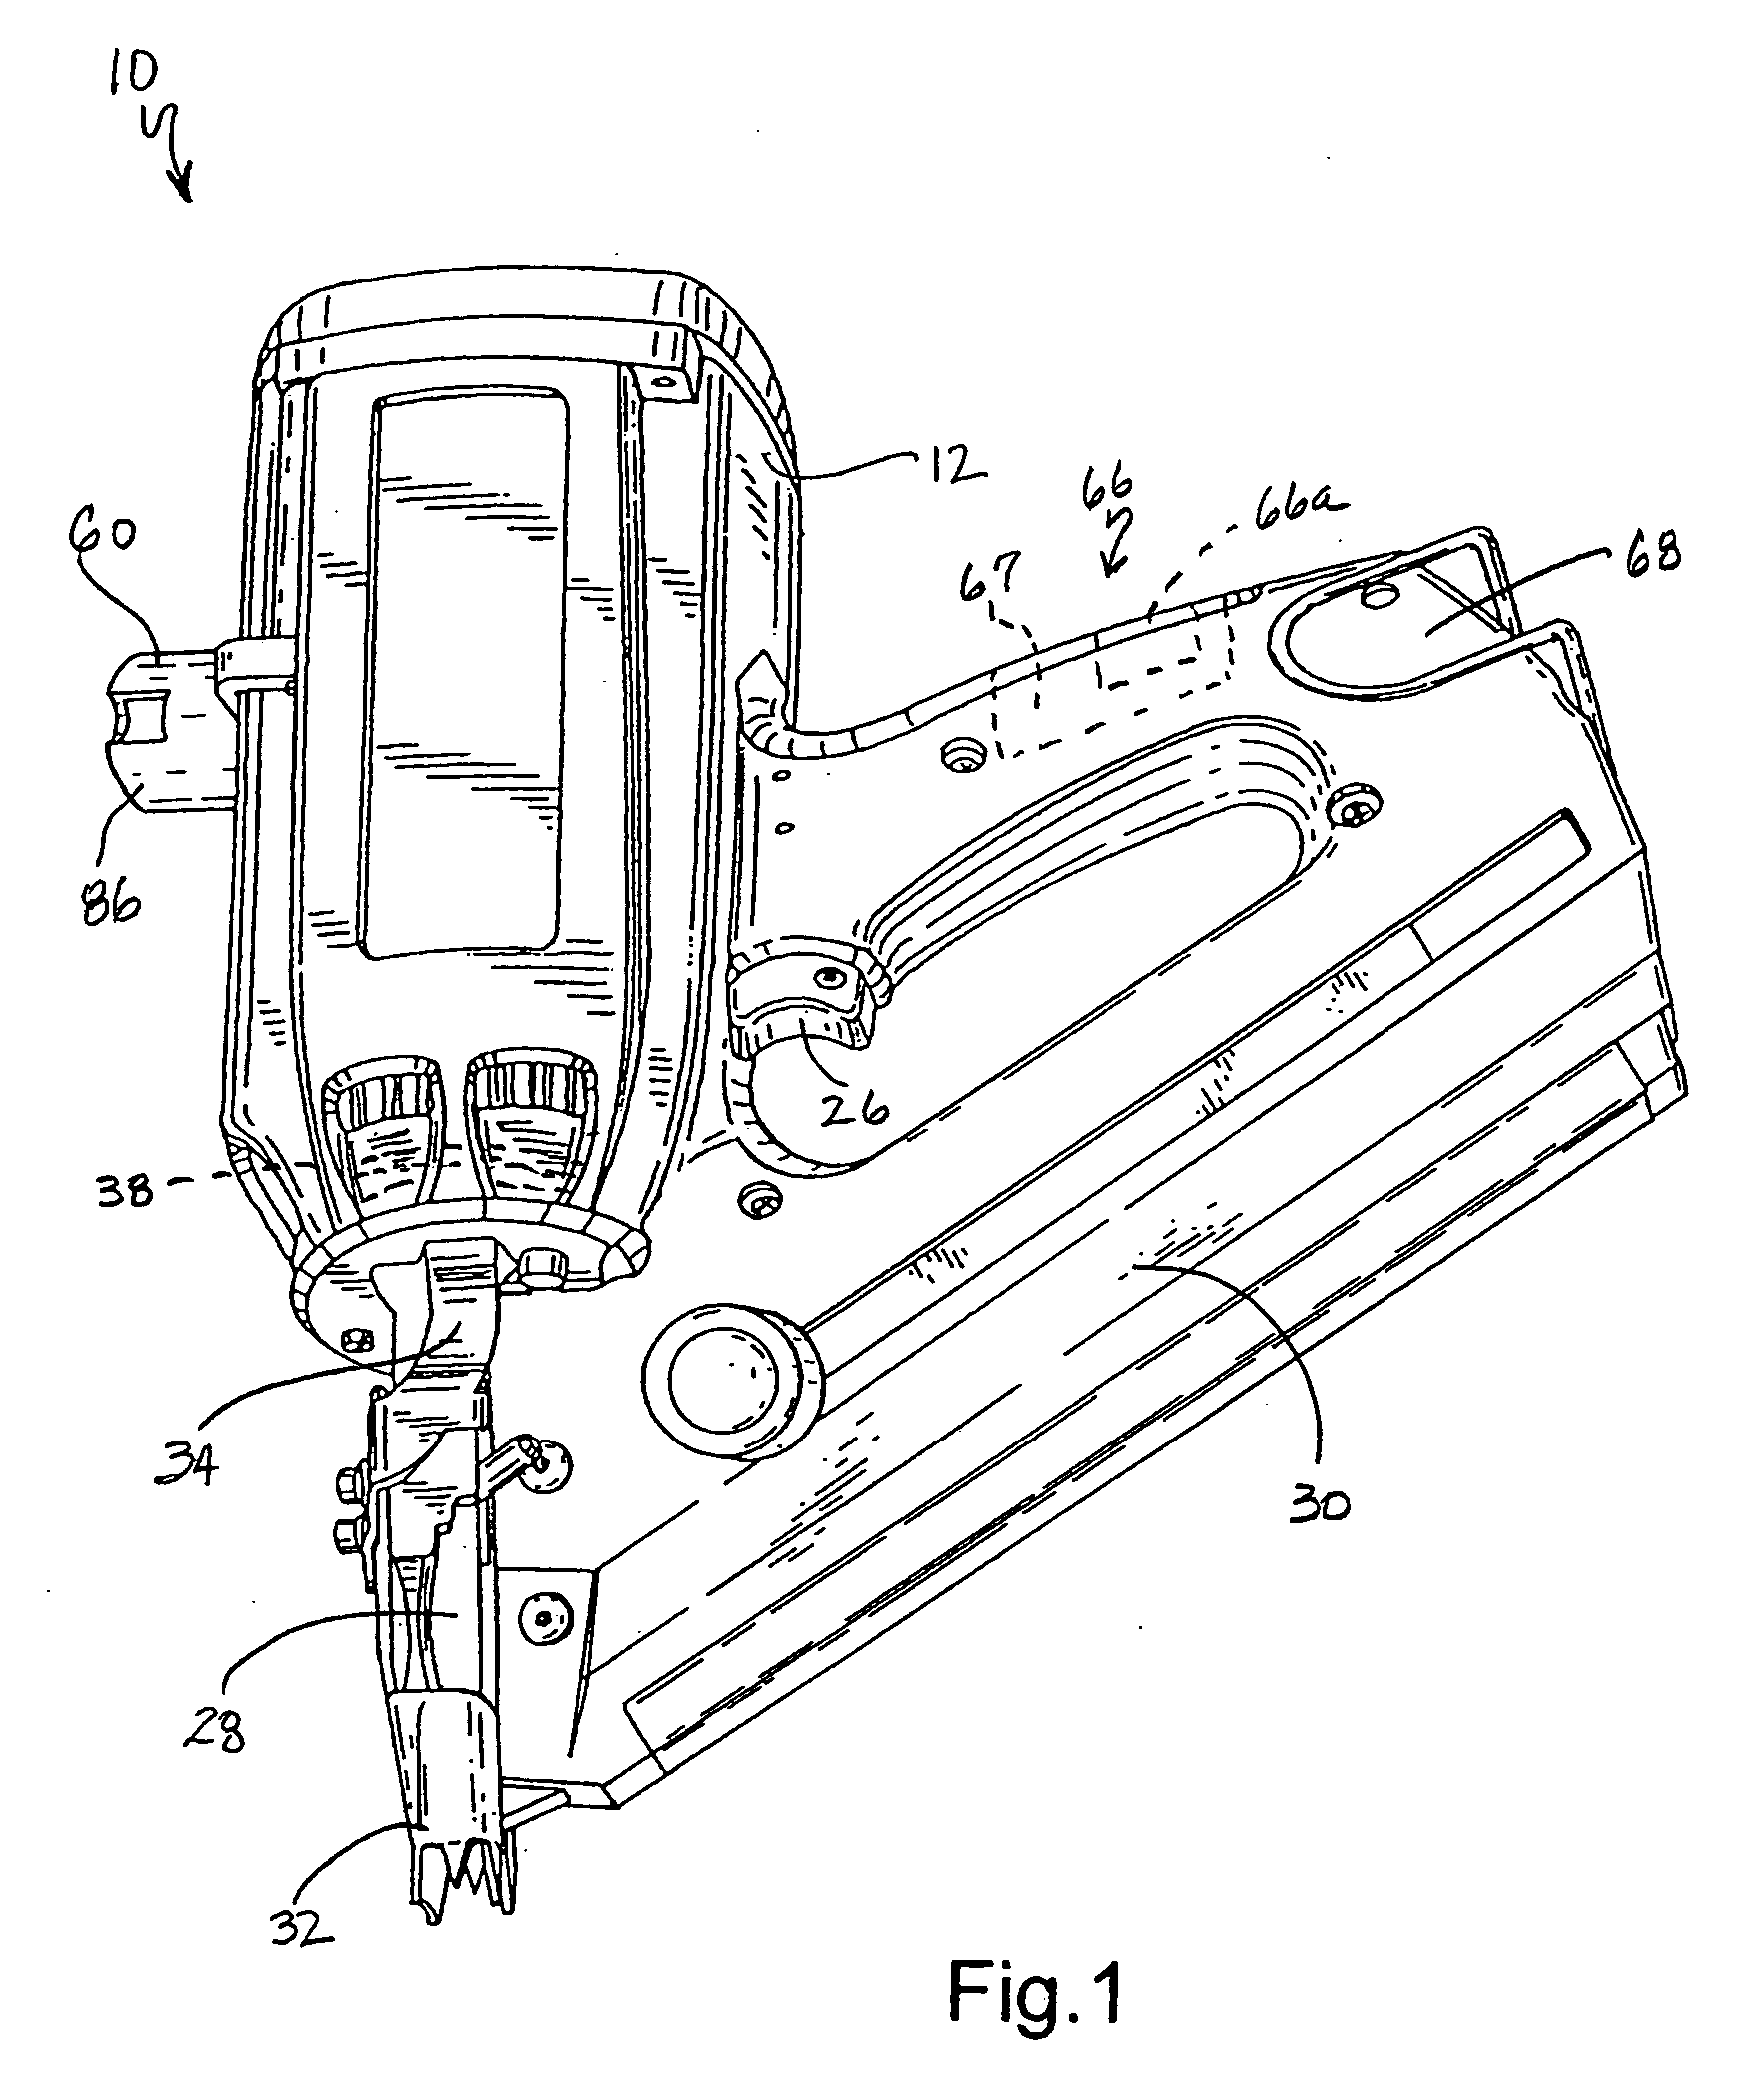 Combustion chamber distance control for combustion-powered fastener-driving tool